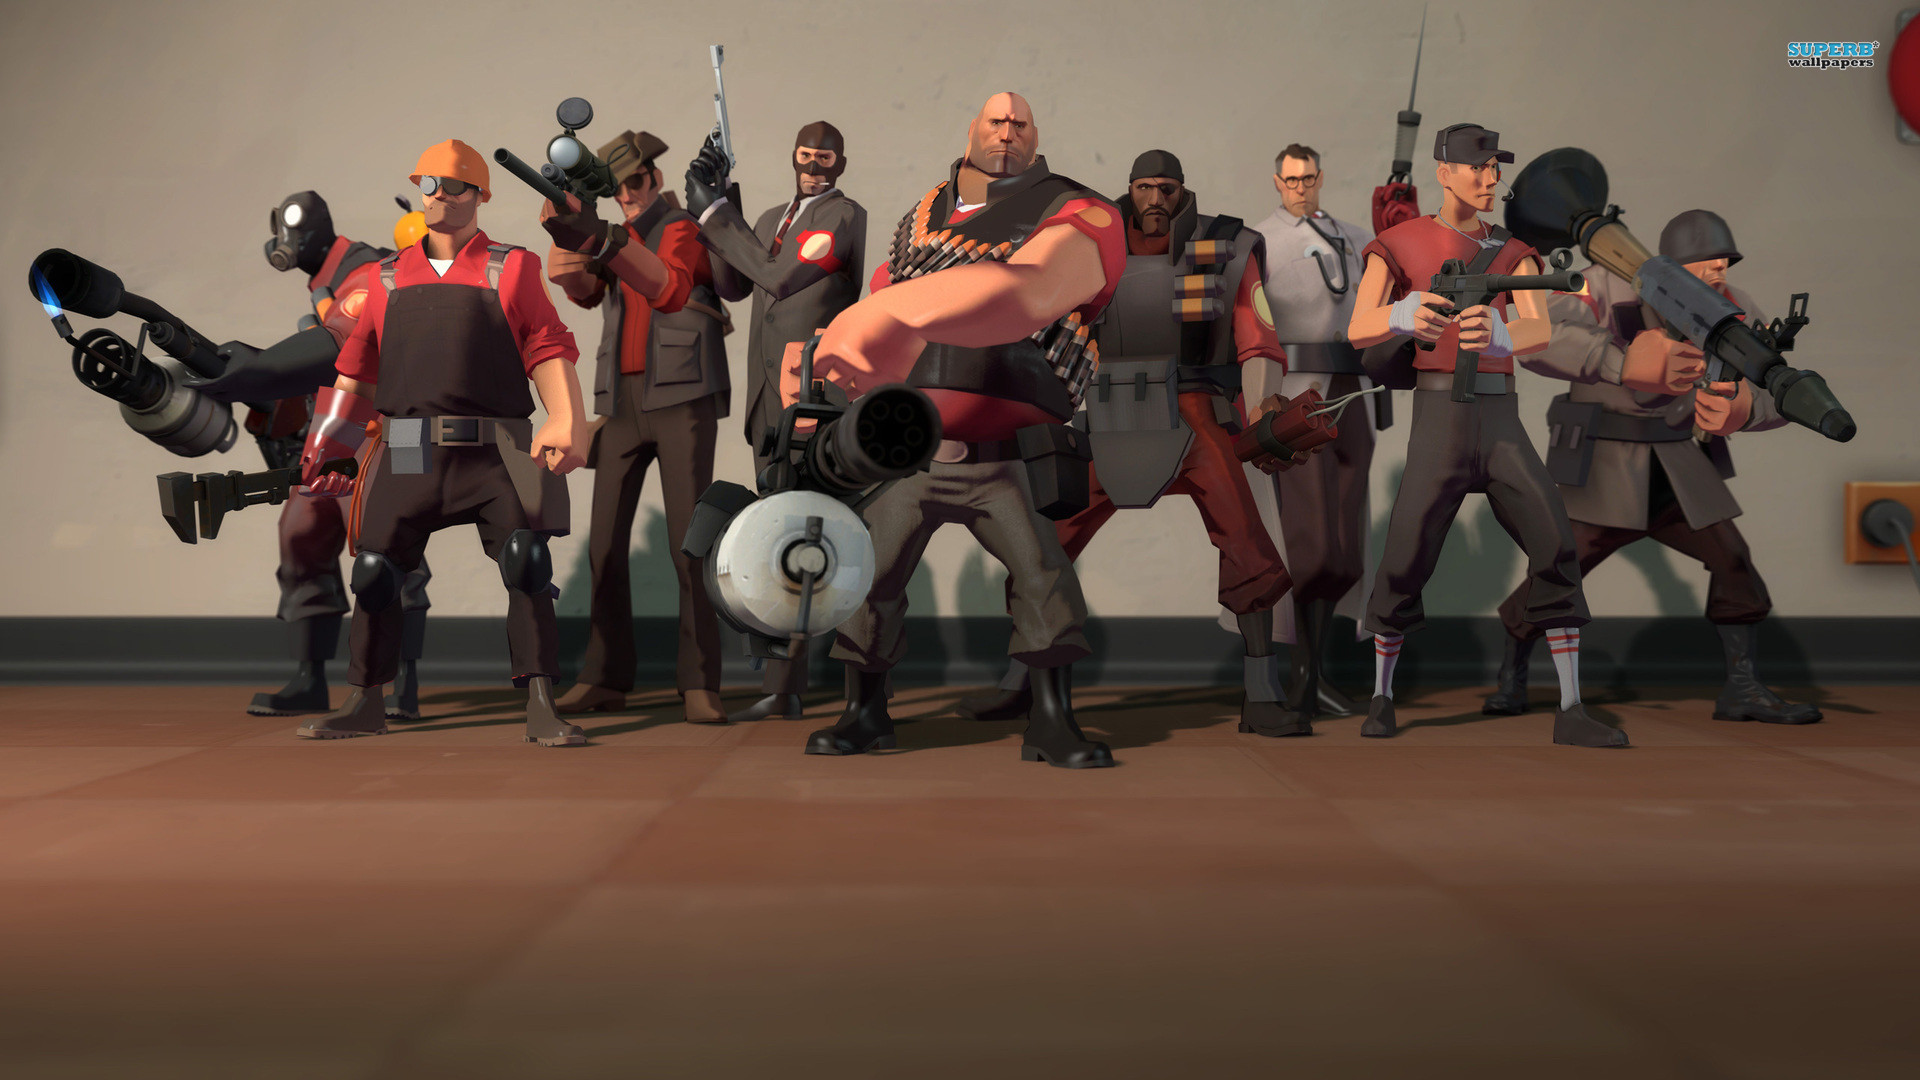 1920x1080 Team Fortress 2 Wallpapers